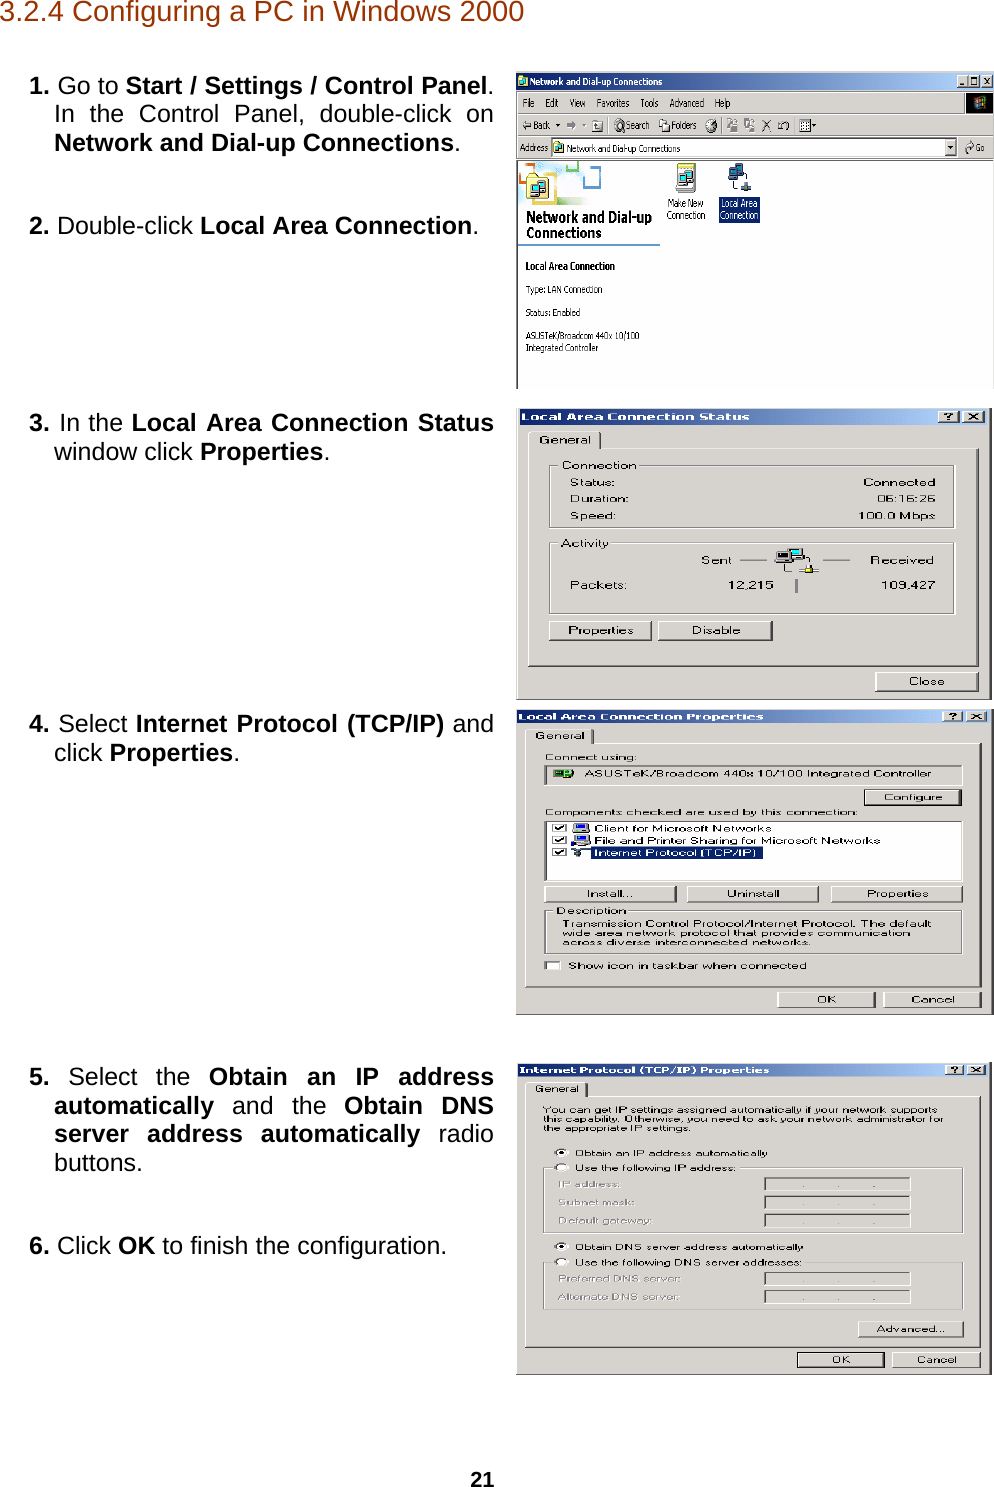 21 3.2.4 Configuring a PC in Windows 2000  1. Go to Start / Settings / Control Panel. In the Control Panel, double-click on Network and Dial-up Connections.  2. Double-click Local Area Connection.  3. In the Local Area Connection Status window click Properties.  4. Select Internet Protocol (TCP/IP) and click Properties.  5. Select the Obtain an IP address automatically  and the  Obtain DNS server address automatically radio buttons.  6. Click OK to finish the configuration.   